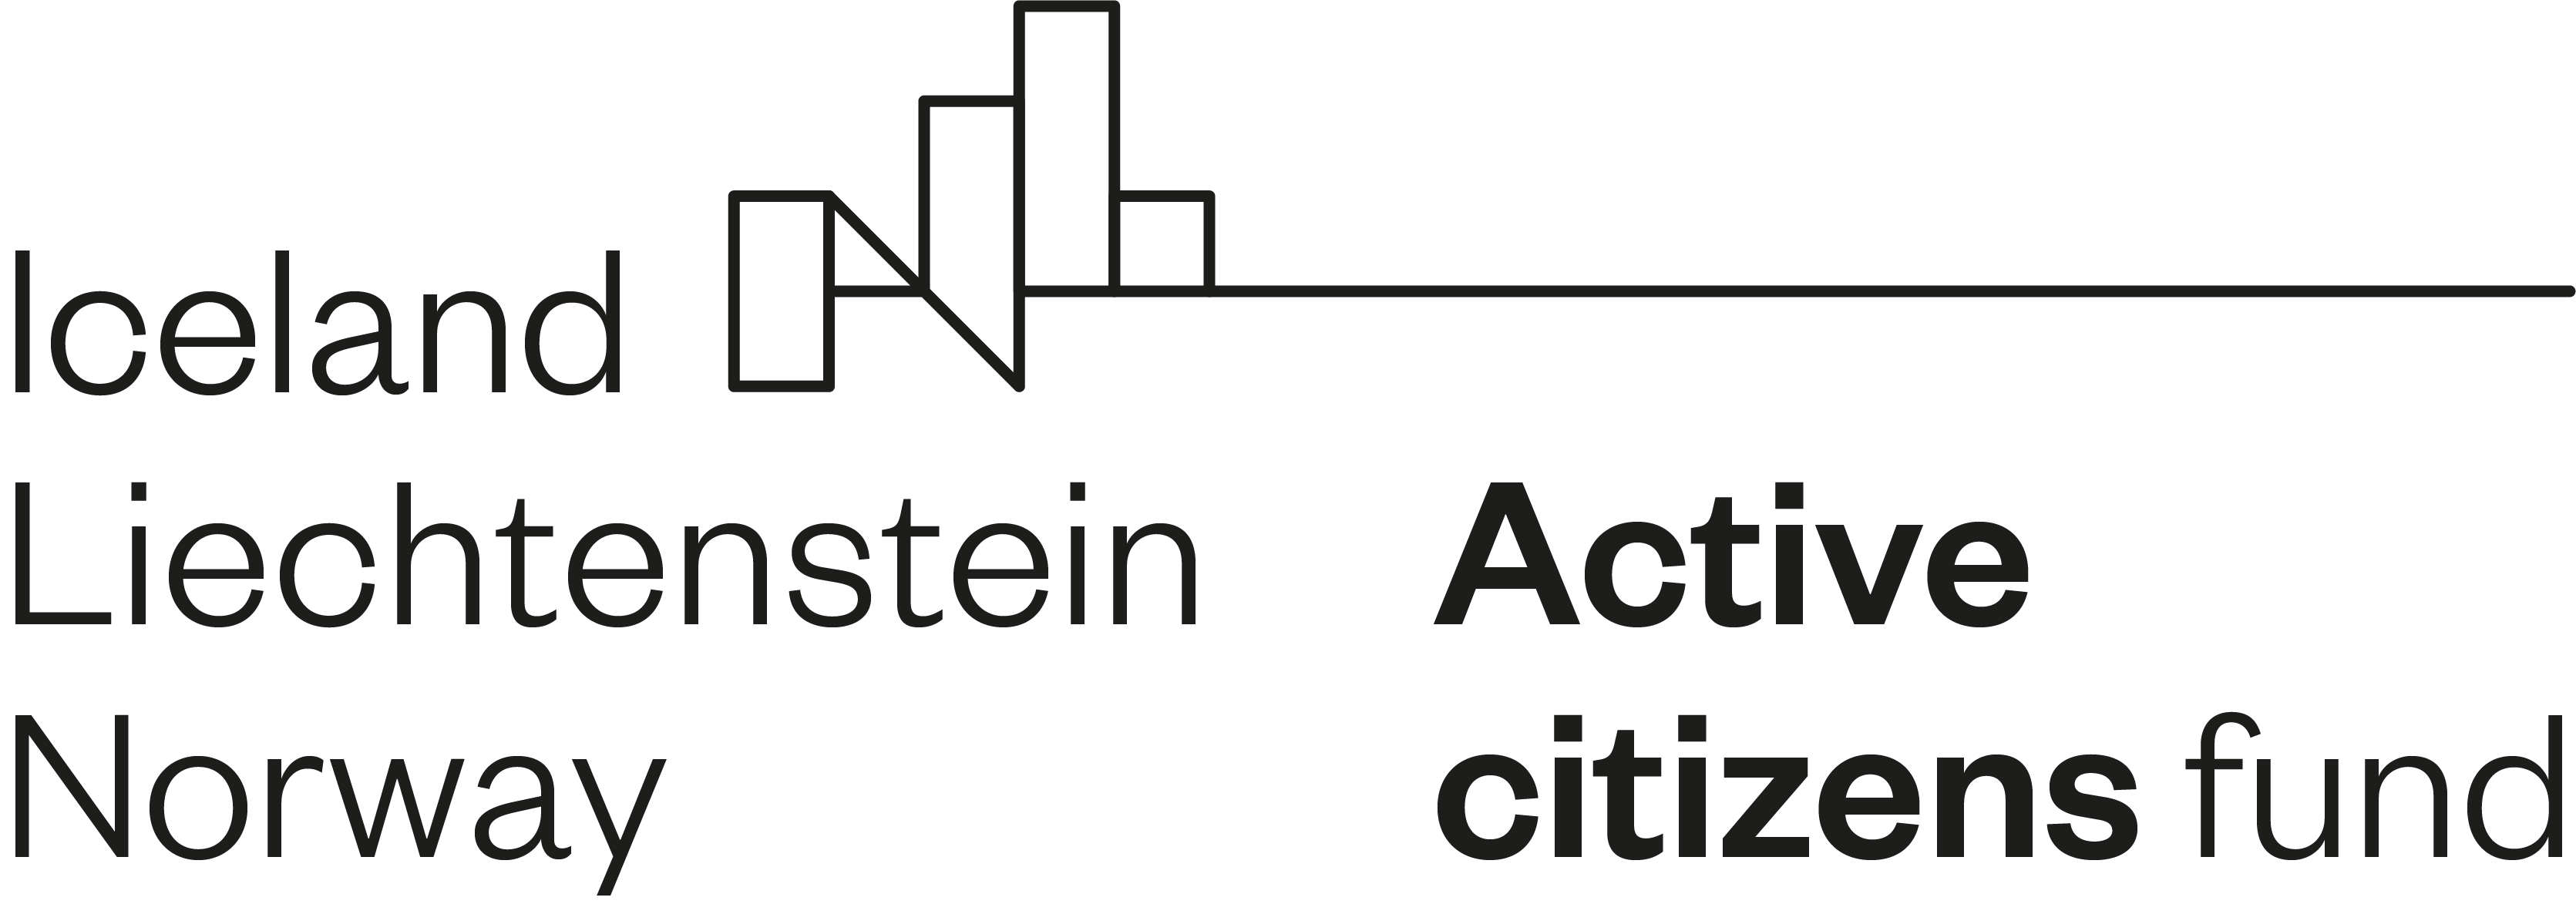 Active citizens_SayStop